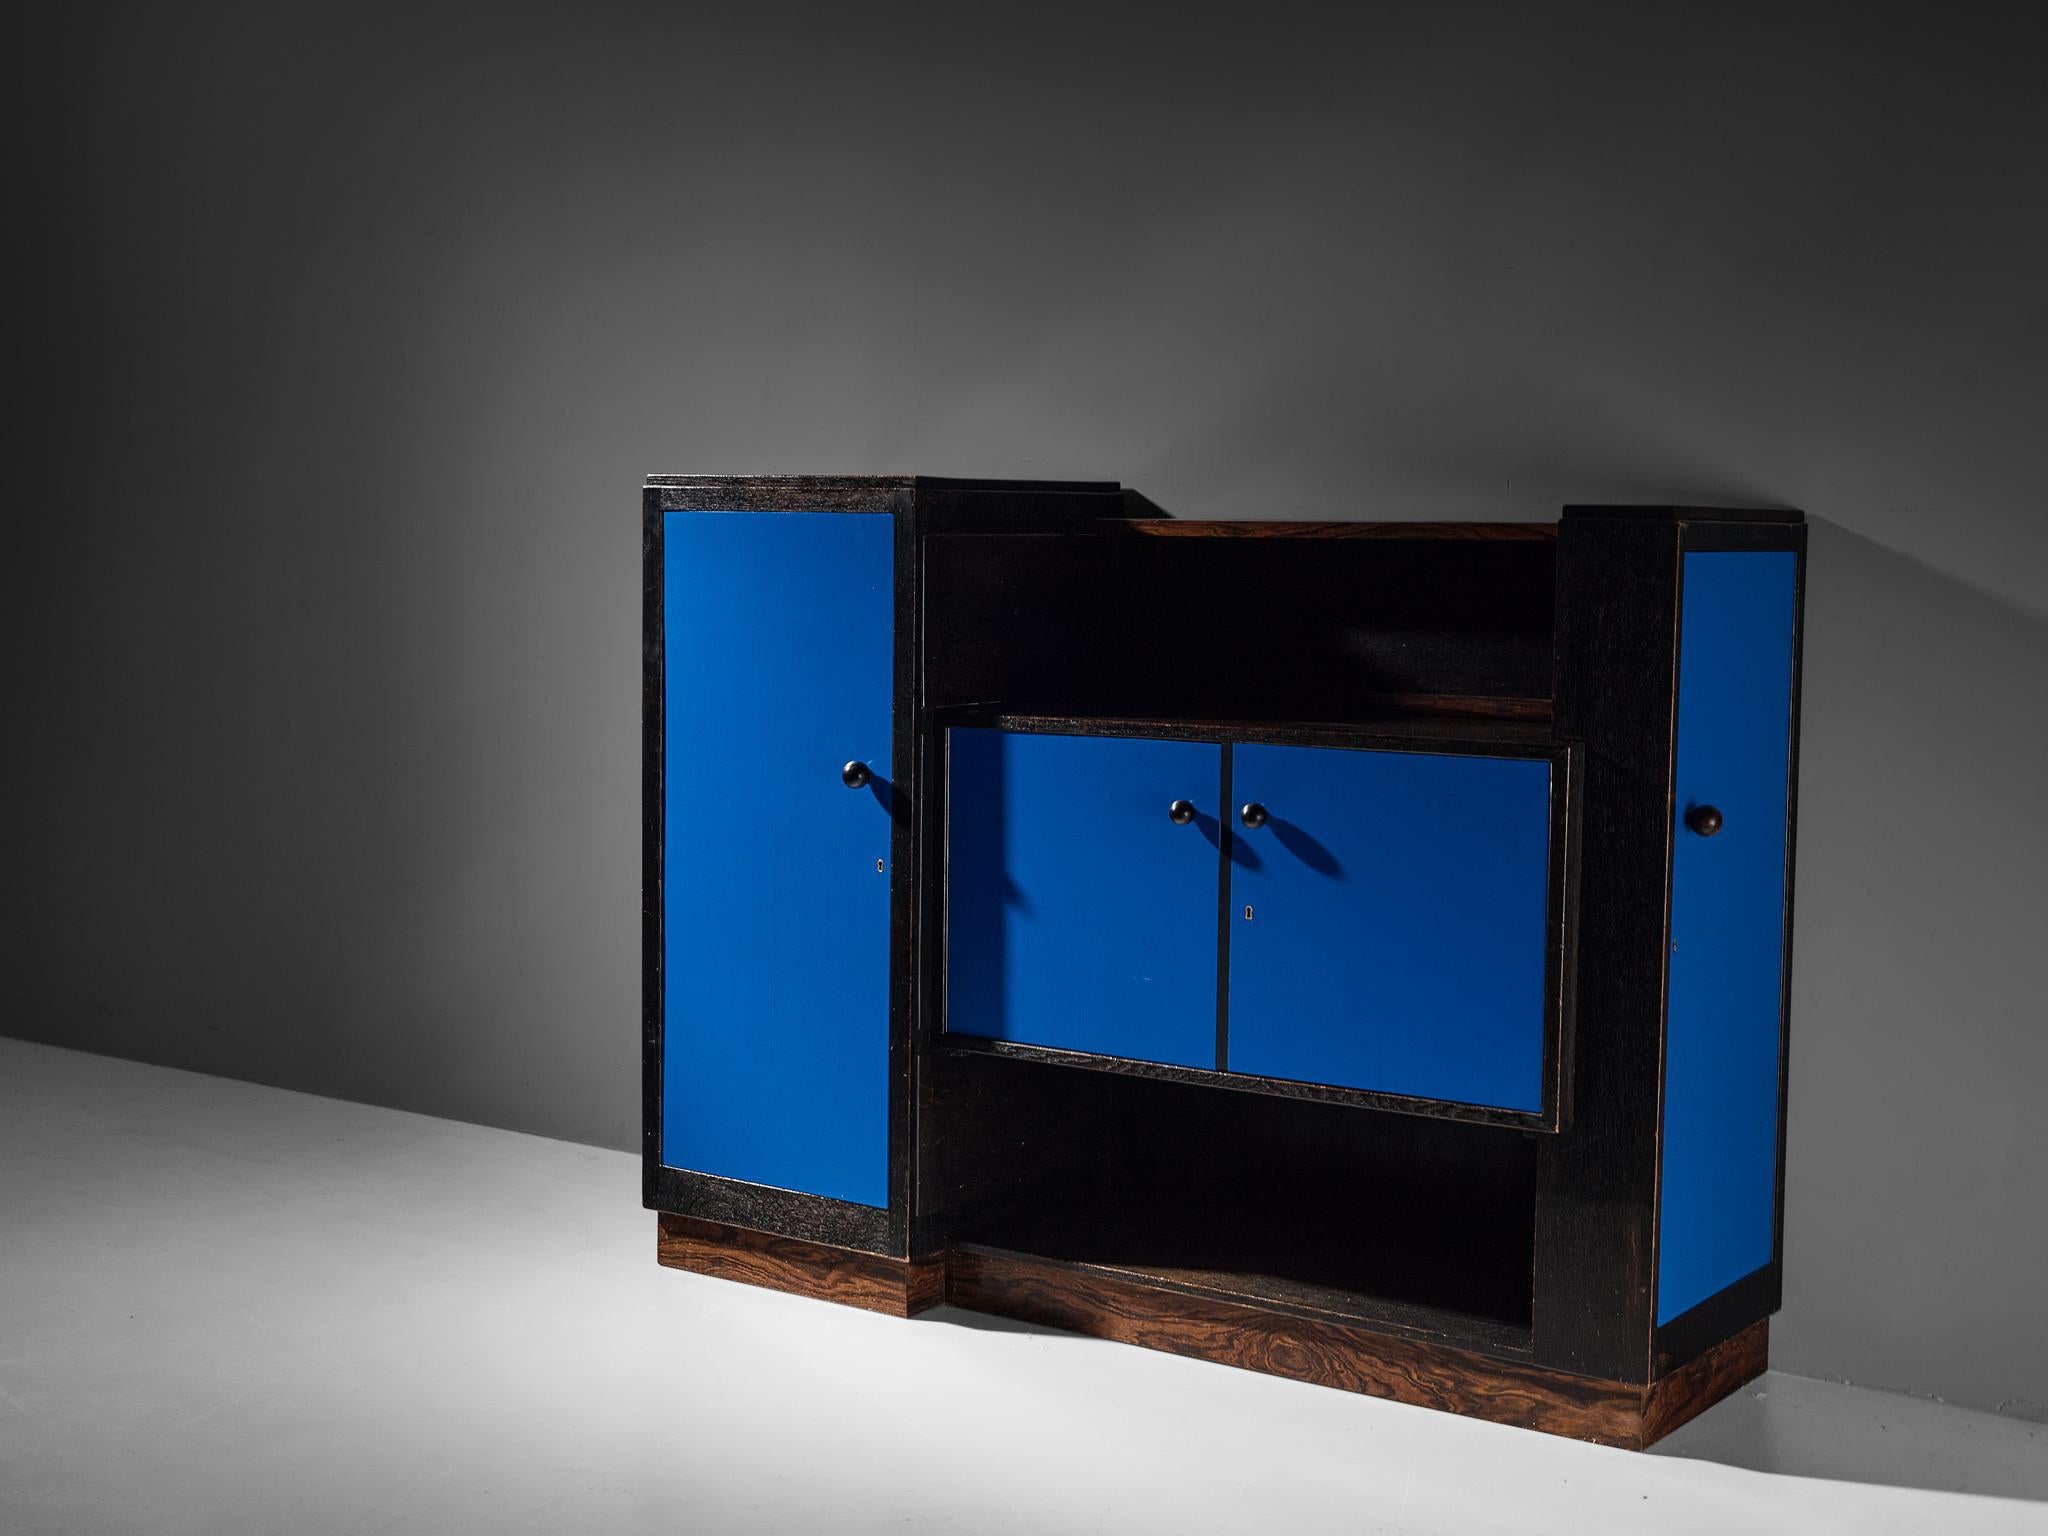 Frits Spanjaard for H. Pander & Zonen, sideboard, lacquered oak, pau ferro veneer, beech, The Netherlands, late 1920s

This cabinet is designed by Frits Spanjaard and belongs to the Hague School, a movement that emphasized geometric shapes, simple